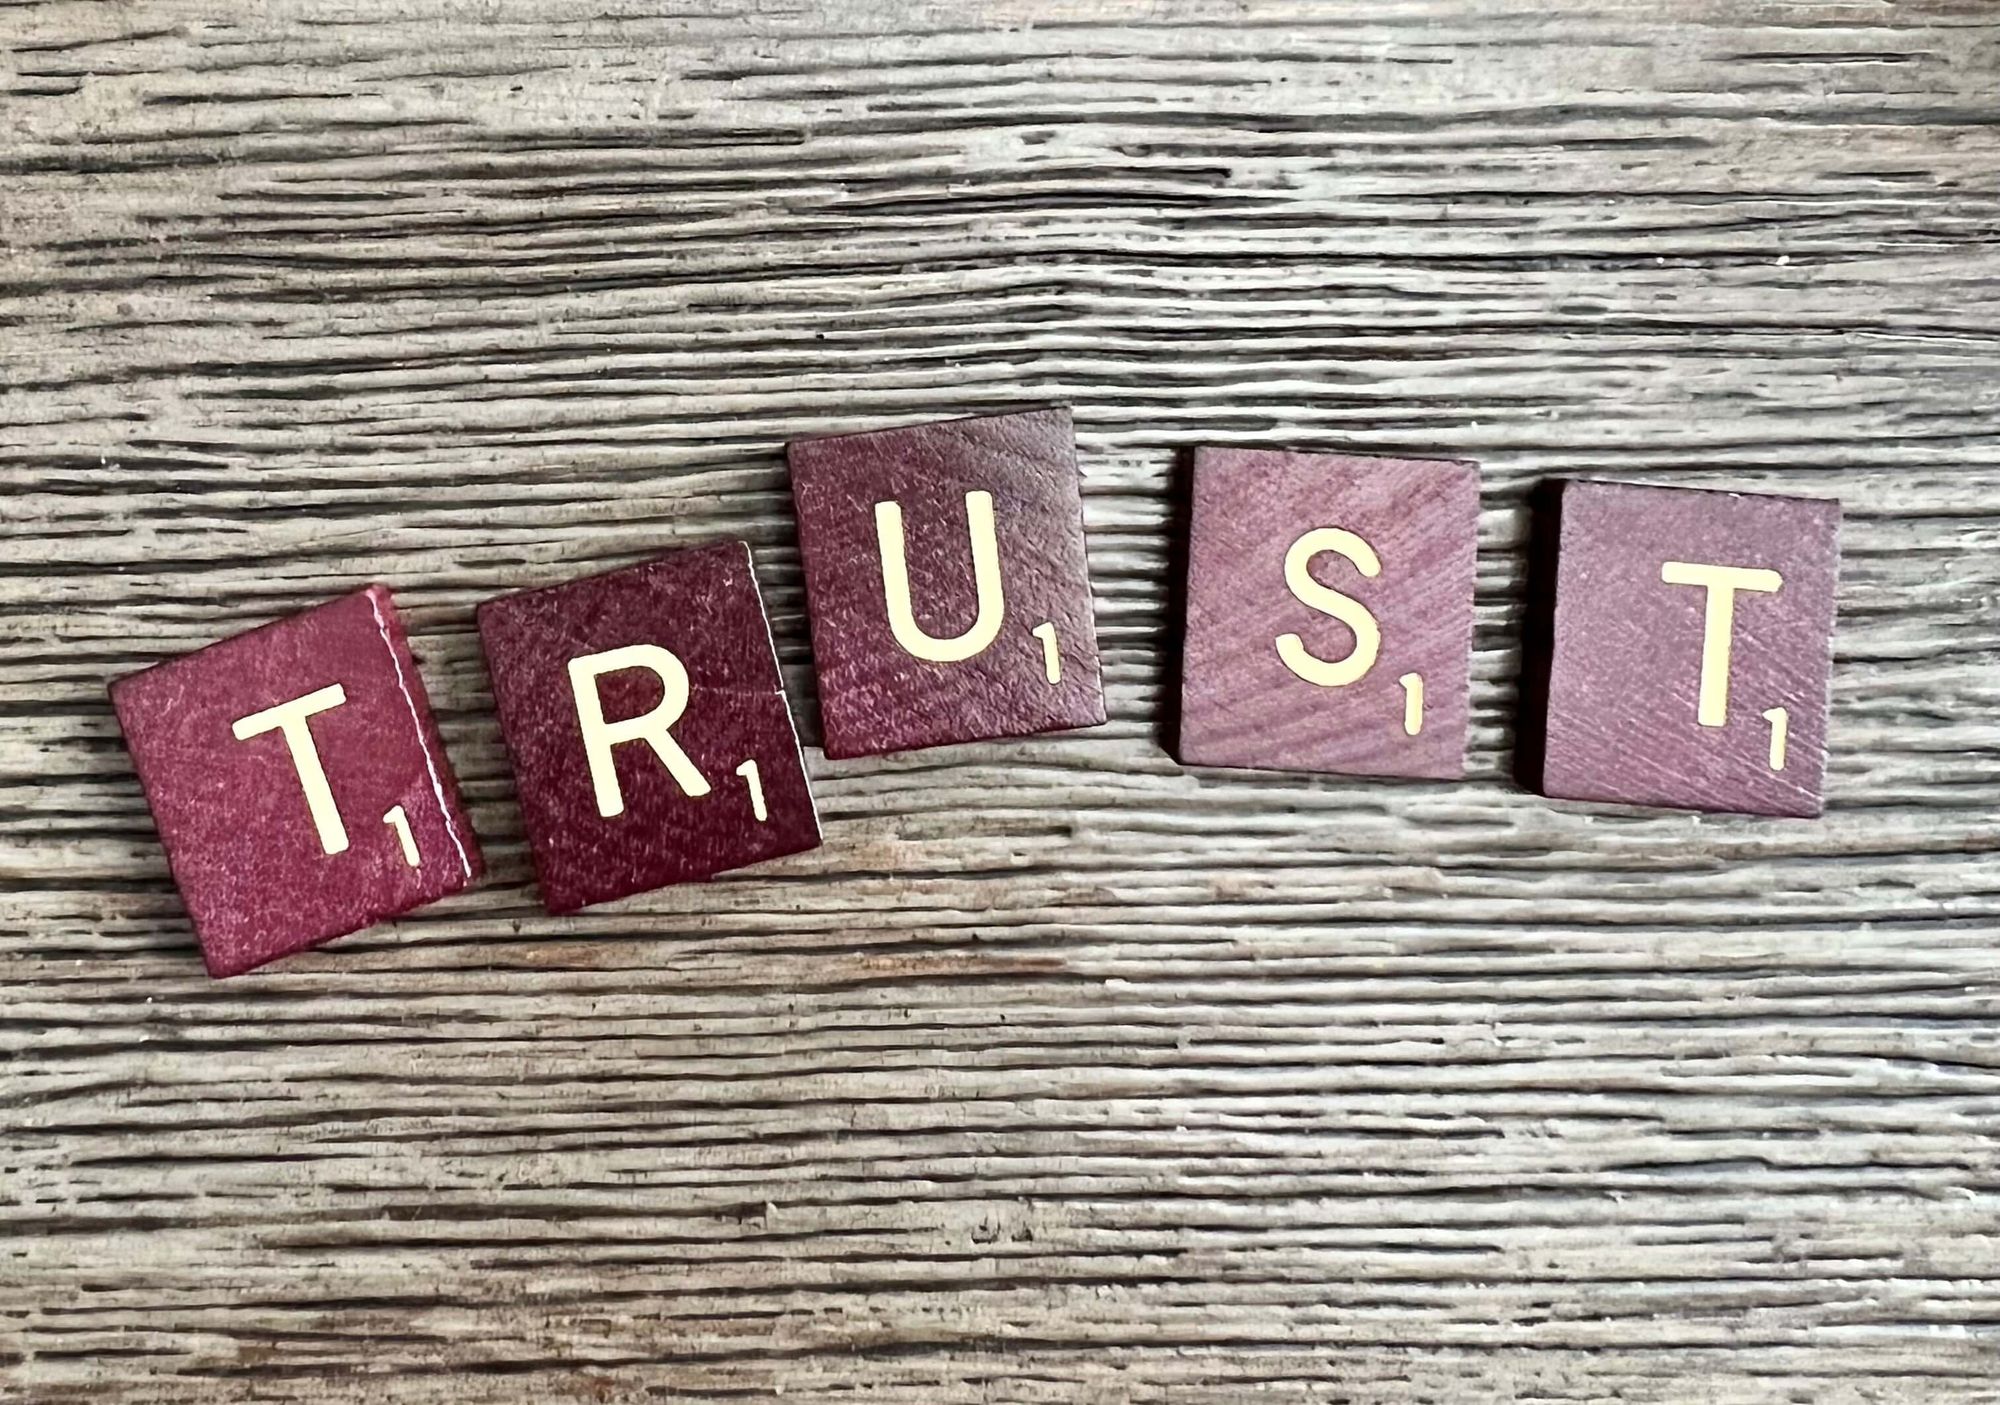 TRUST - how to support the ceo